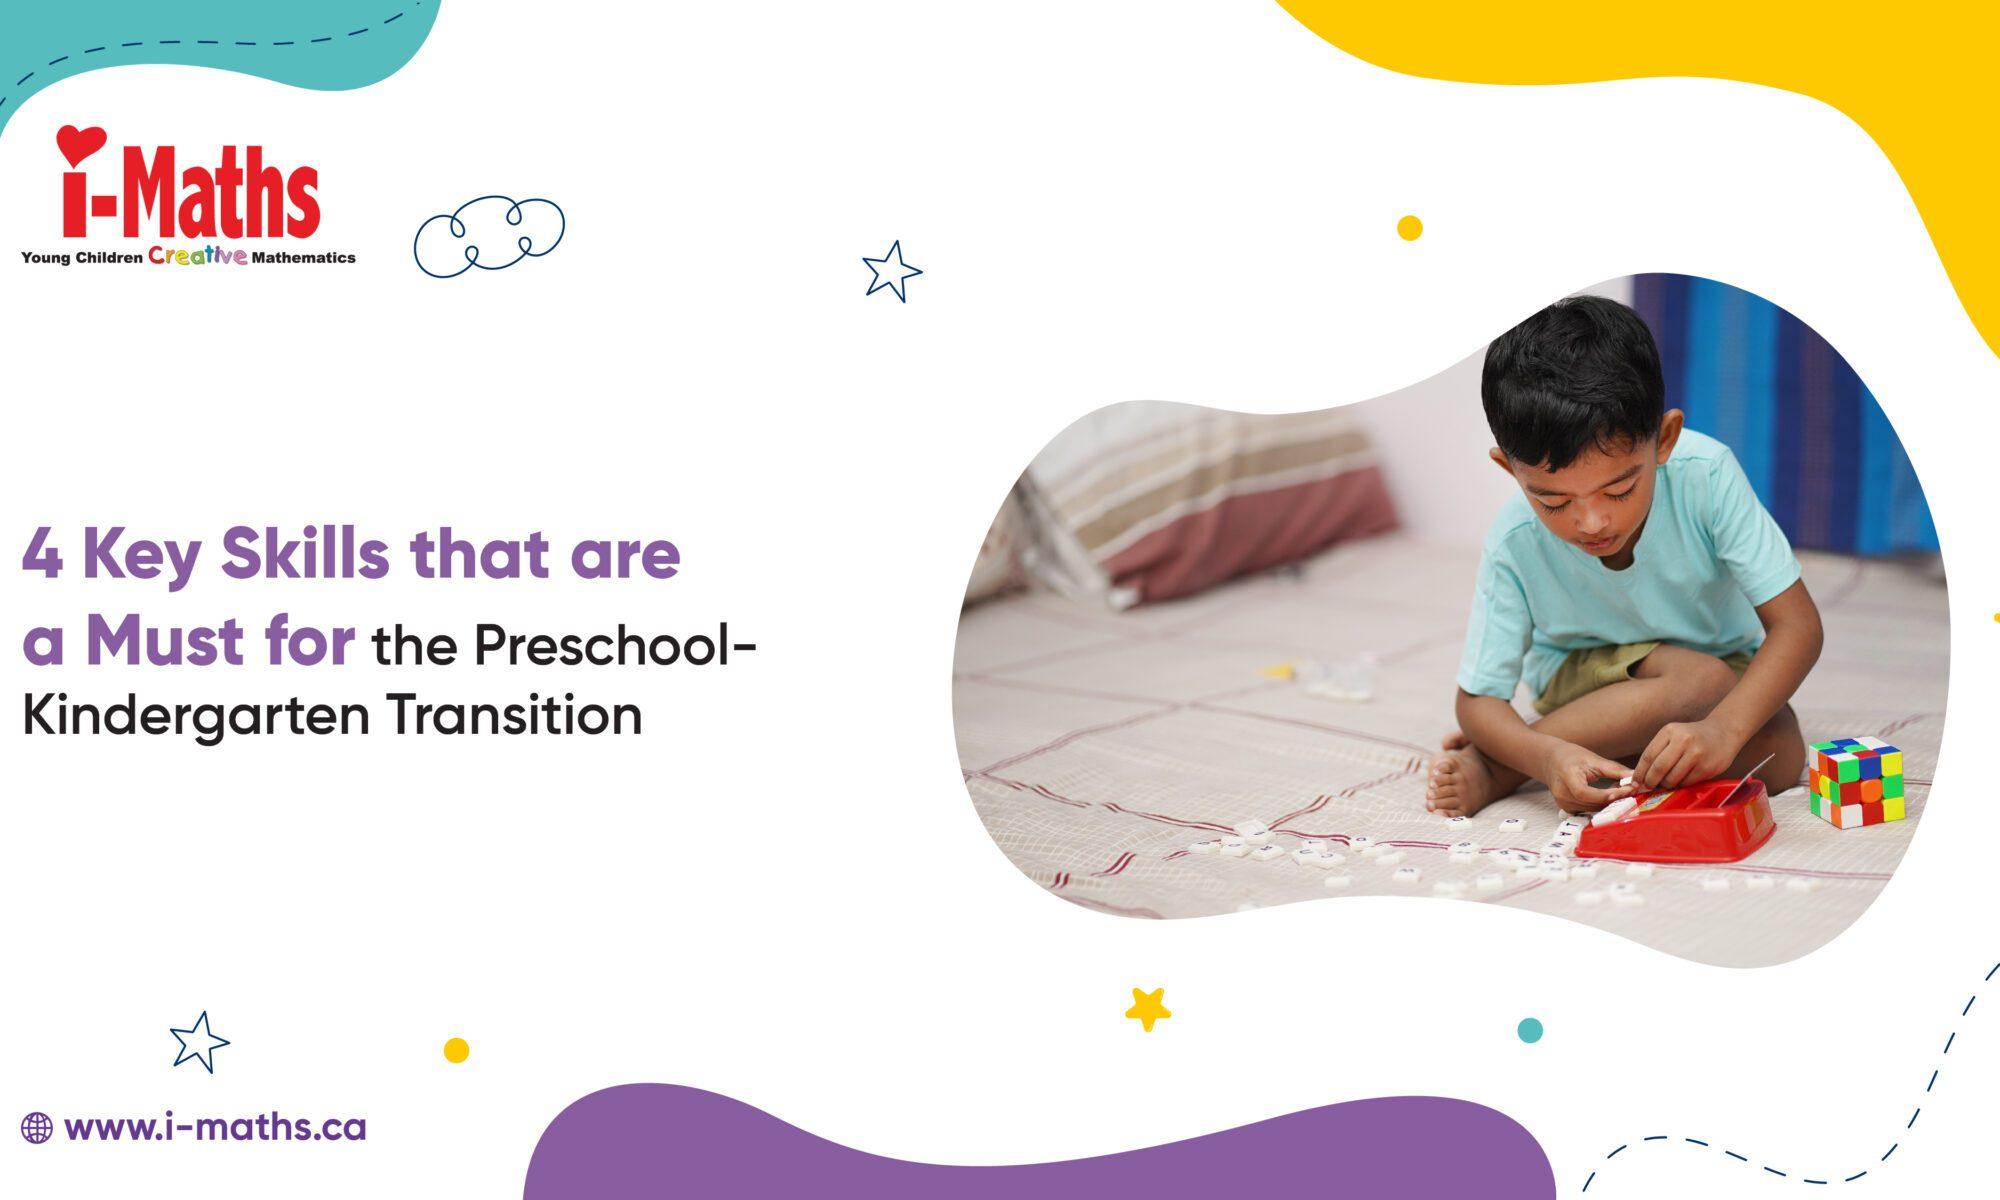 Banner Text: 4 Key Skills that are a Must for the Preschool-Kindergarten Transition.